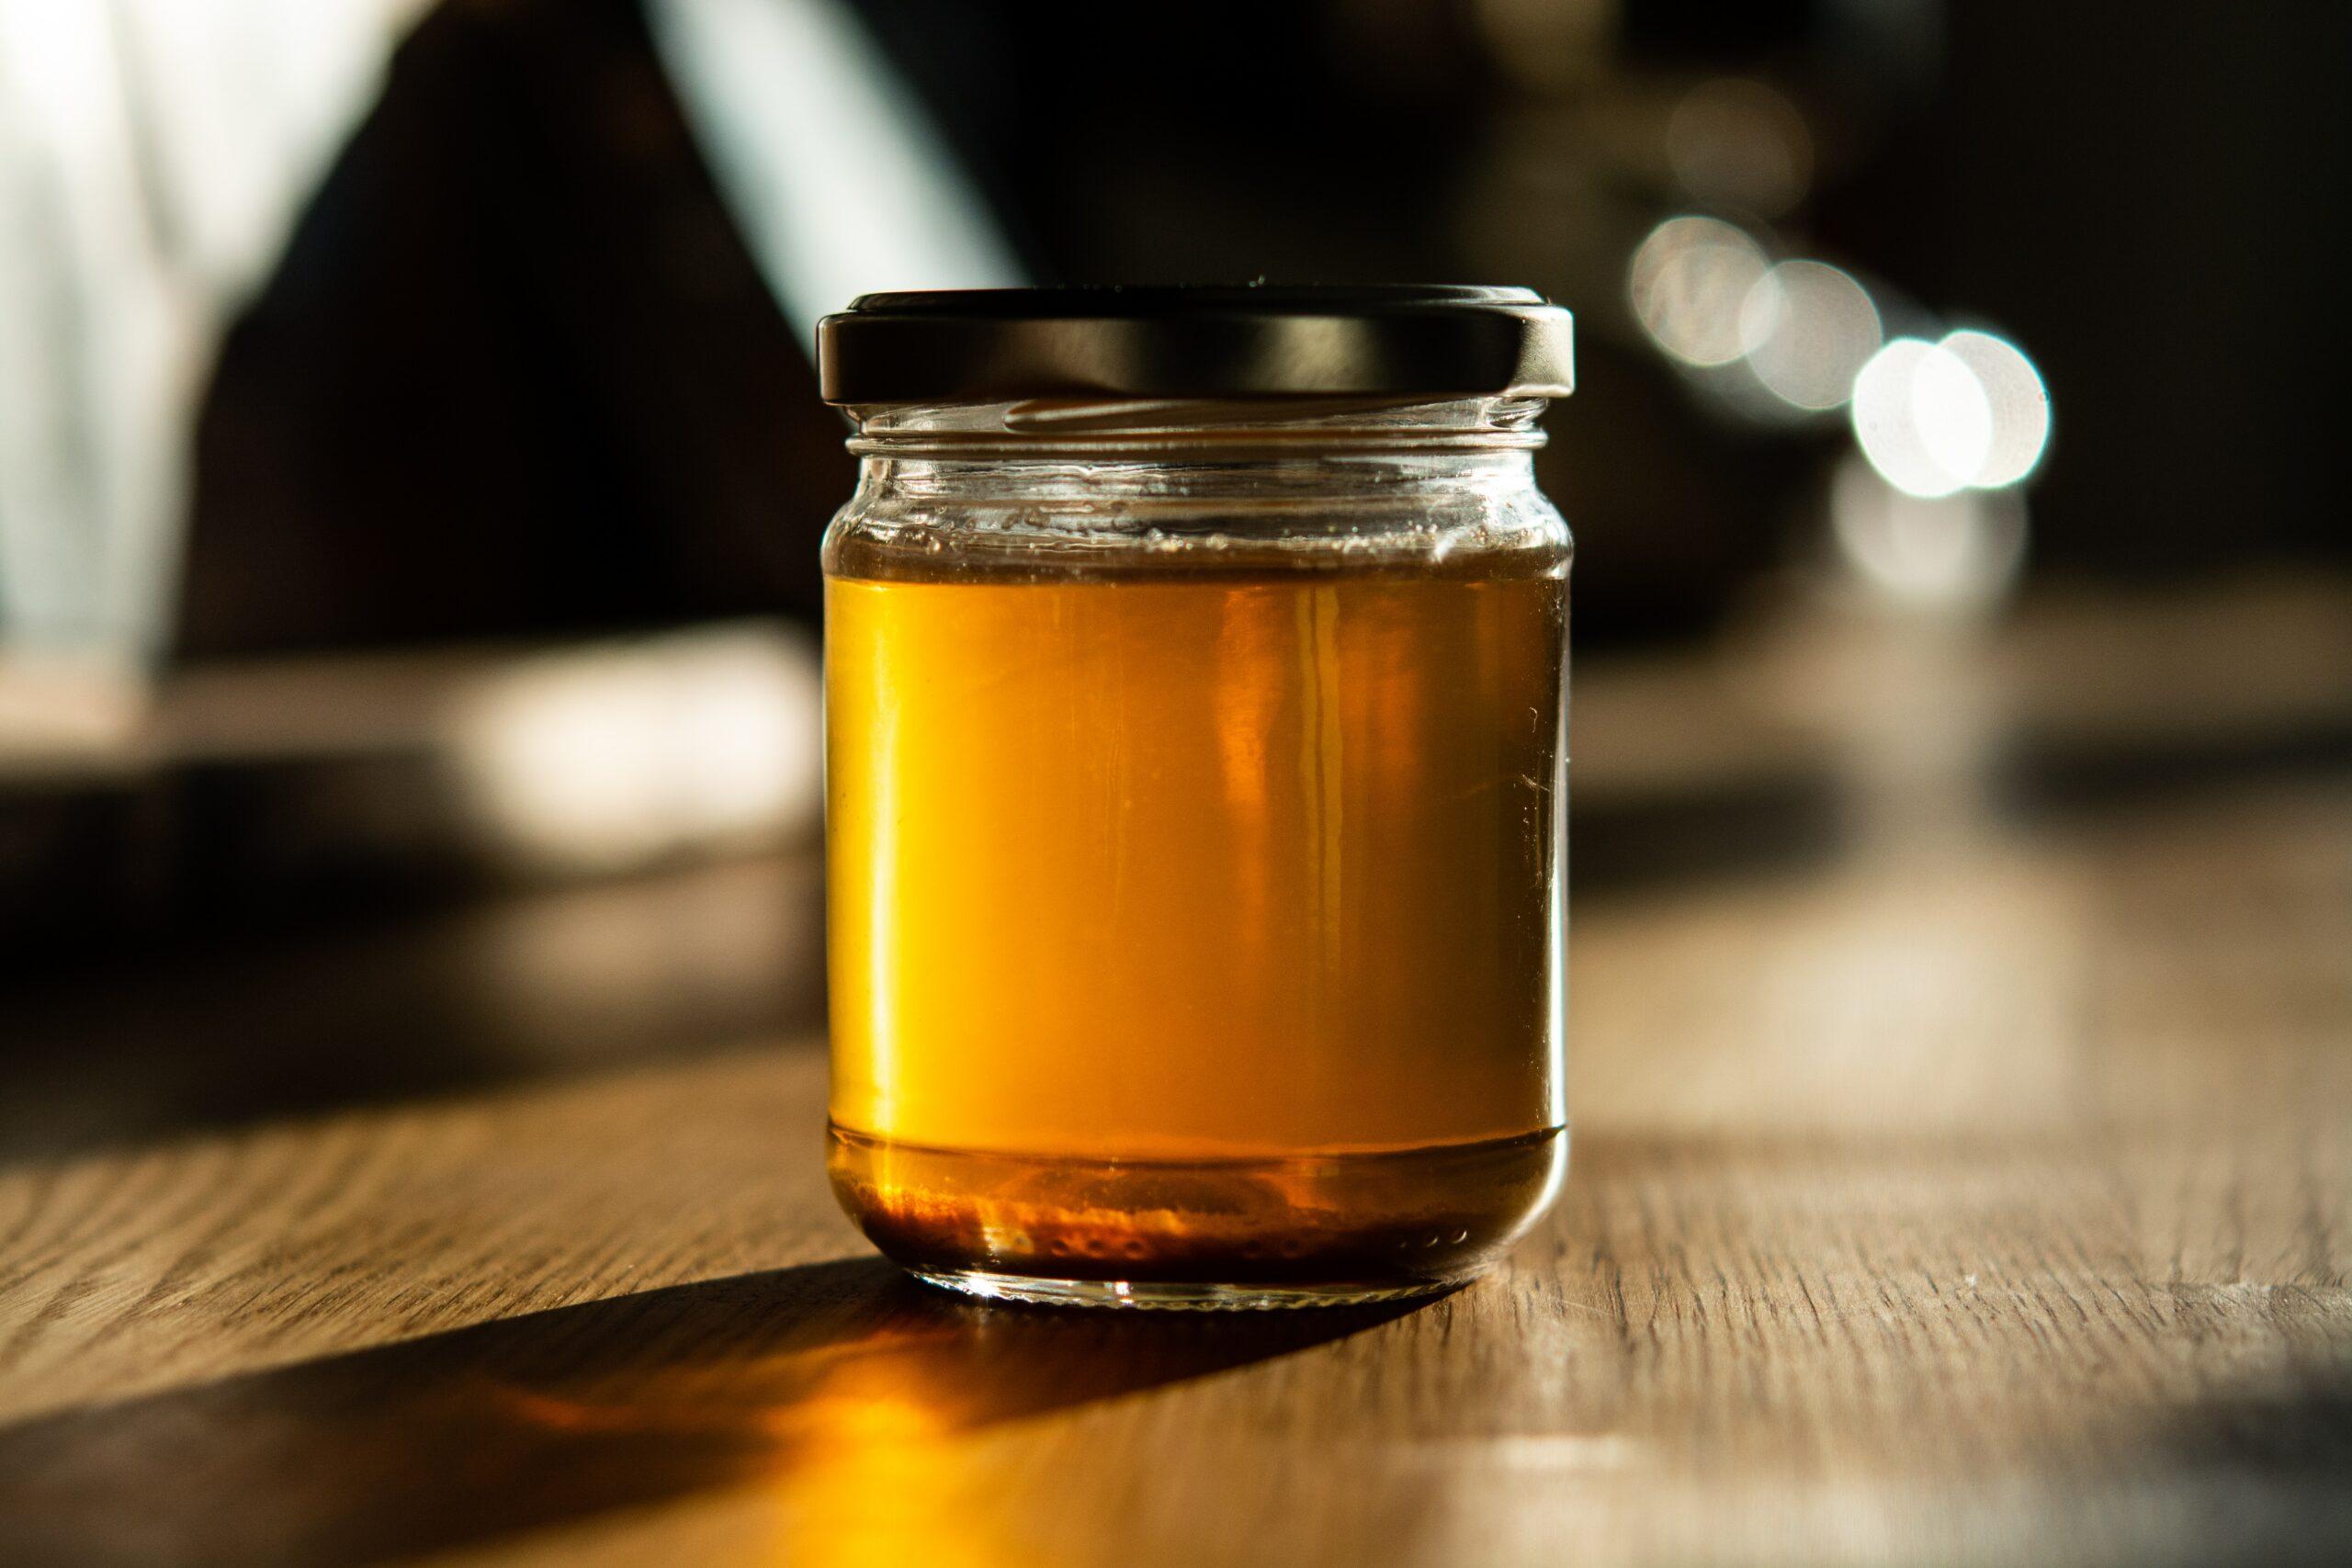 Bone Broth: Benefits, Recipes, and More Dr. Will Cole 1